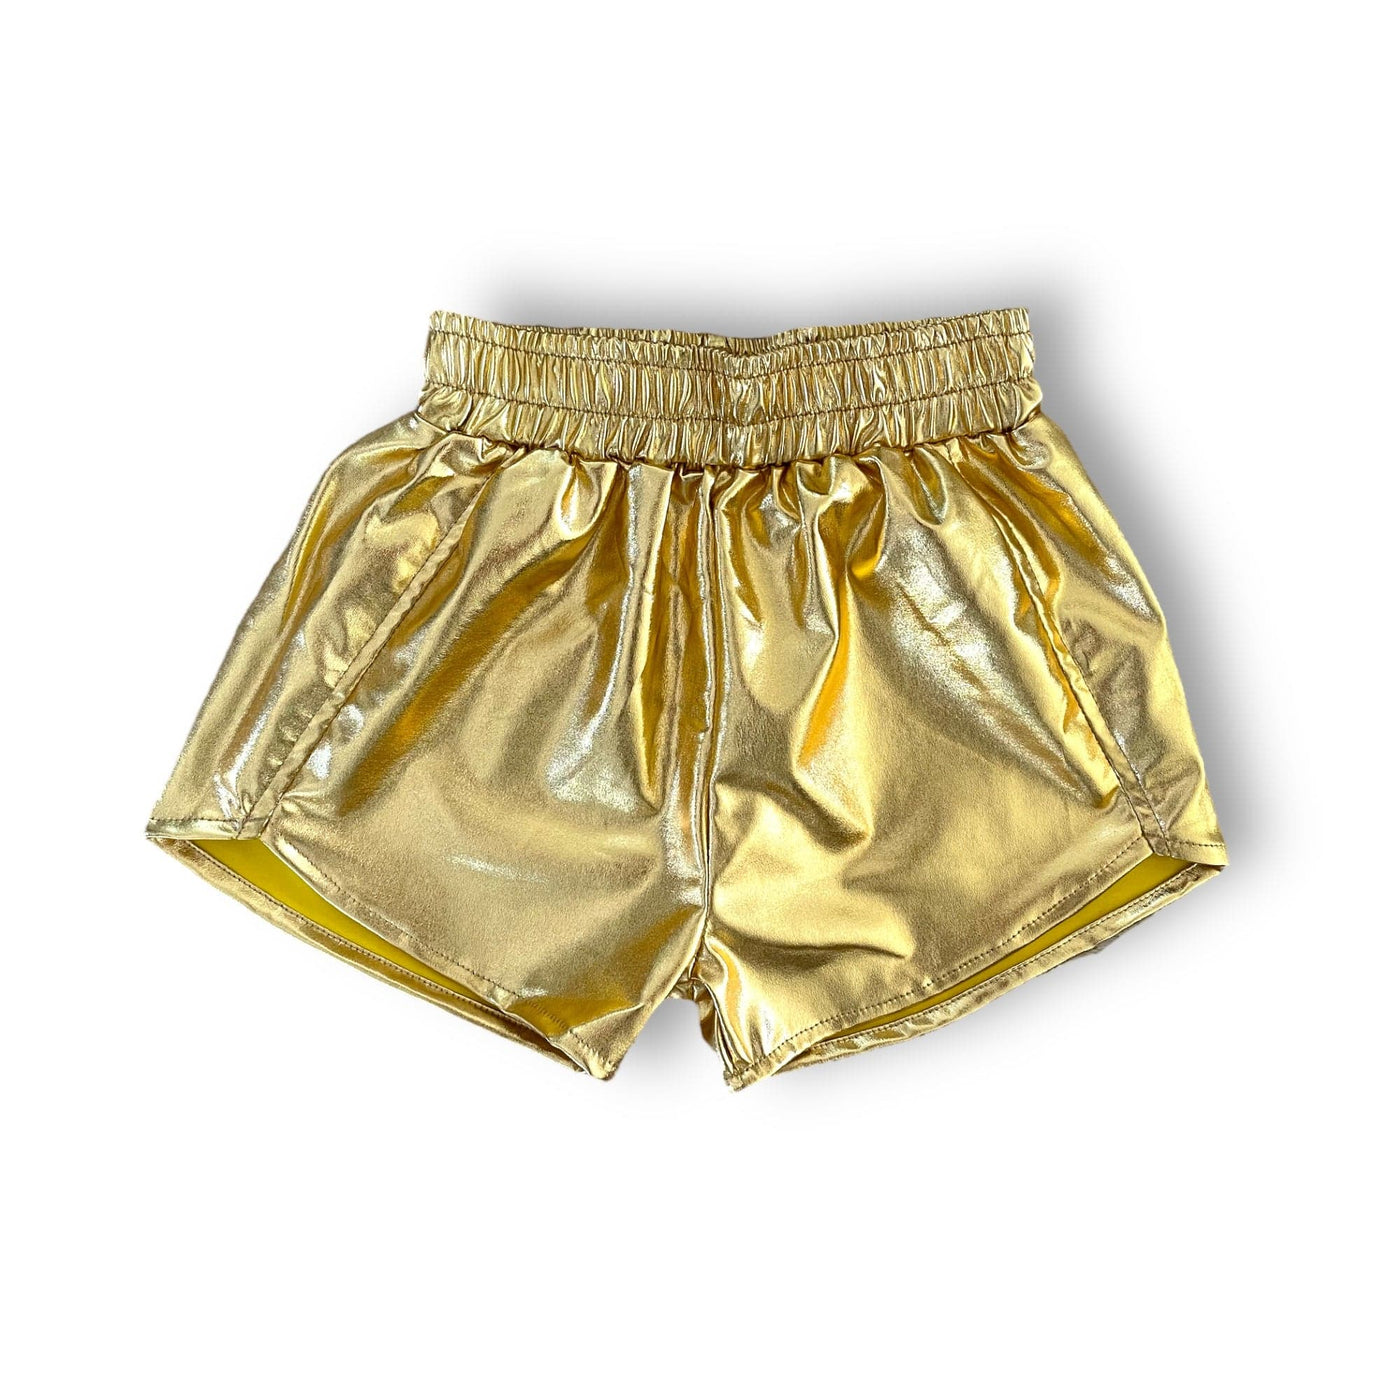 Best Day Ever Kids Baby & Toddler Bottoms Retro Lame Short - Gold buy online boutique kids clothing